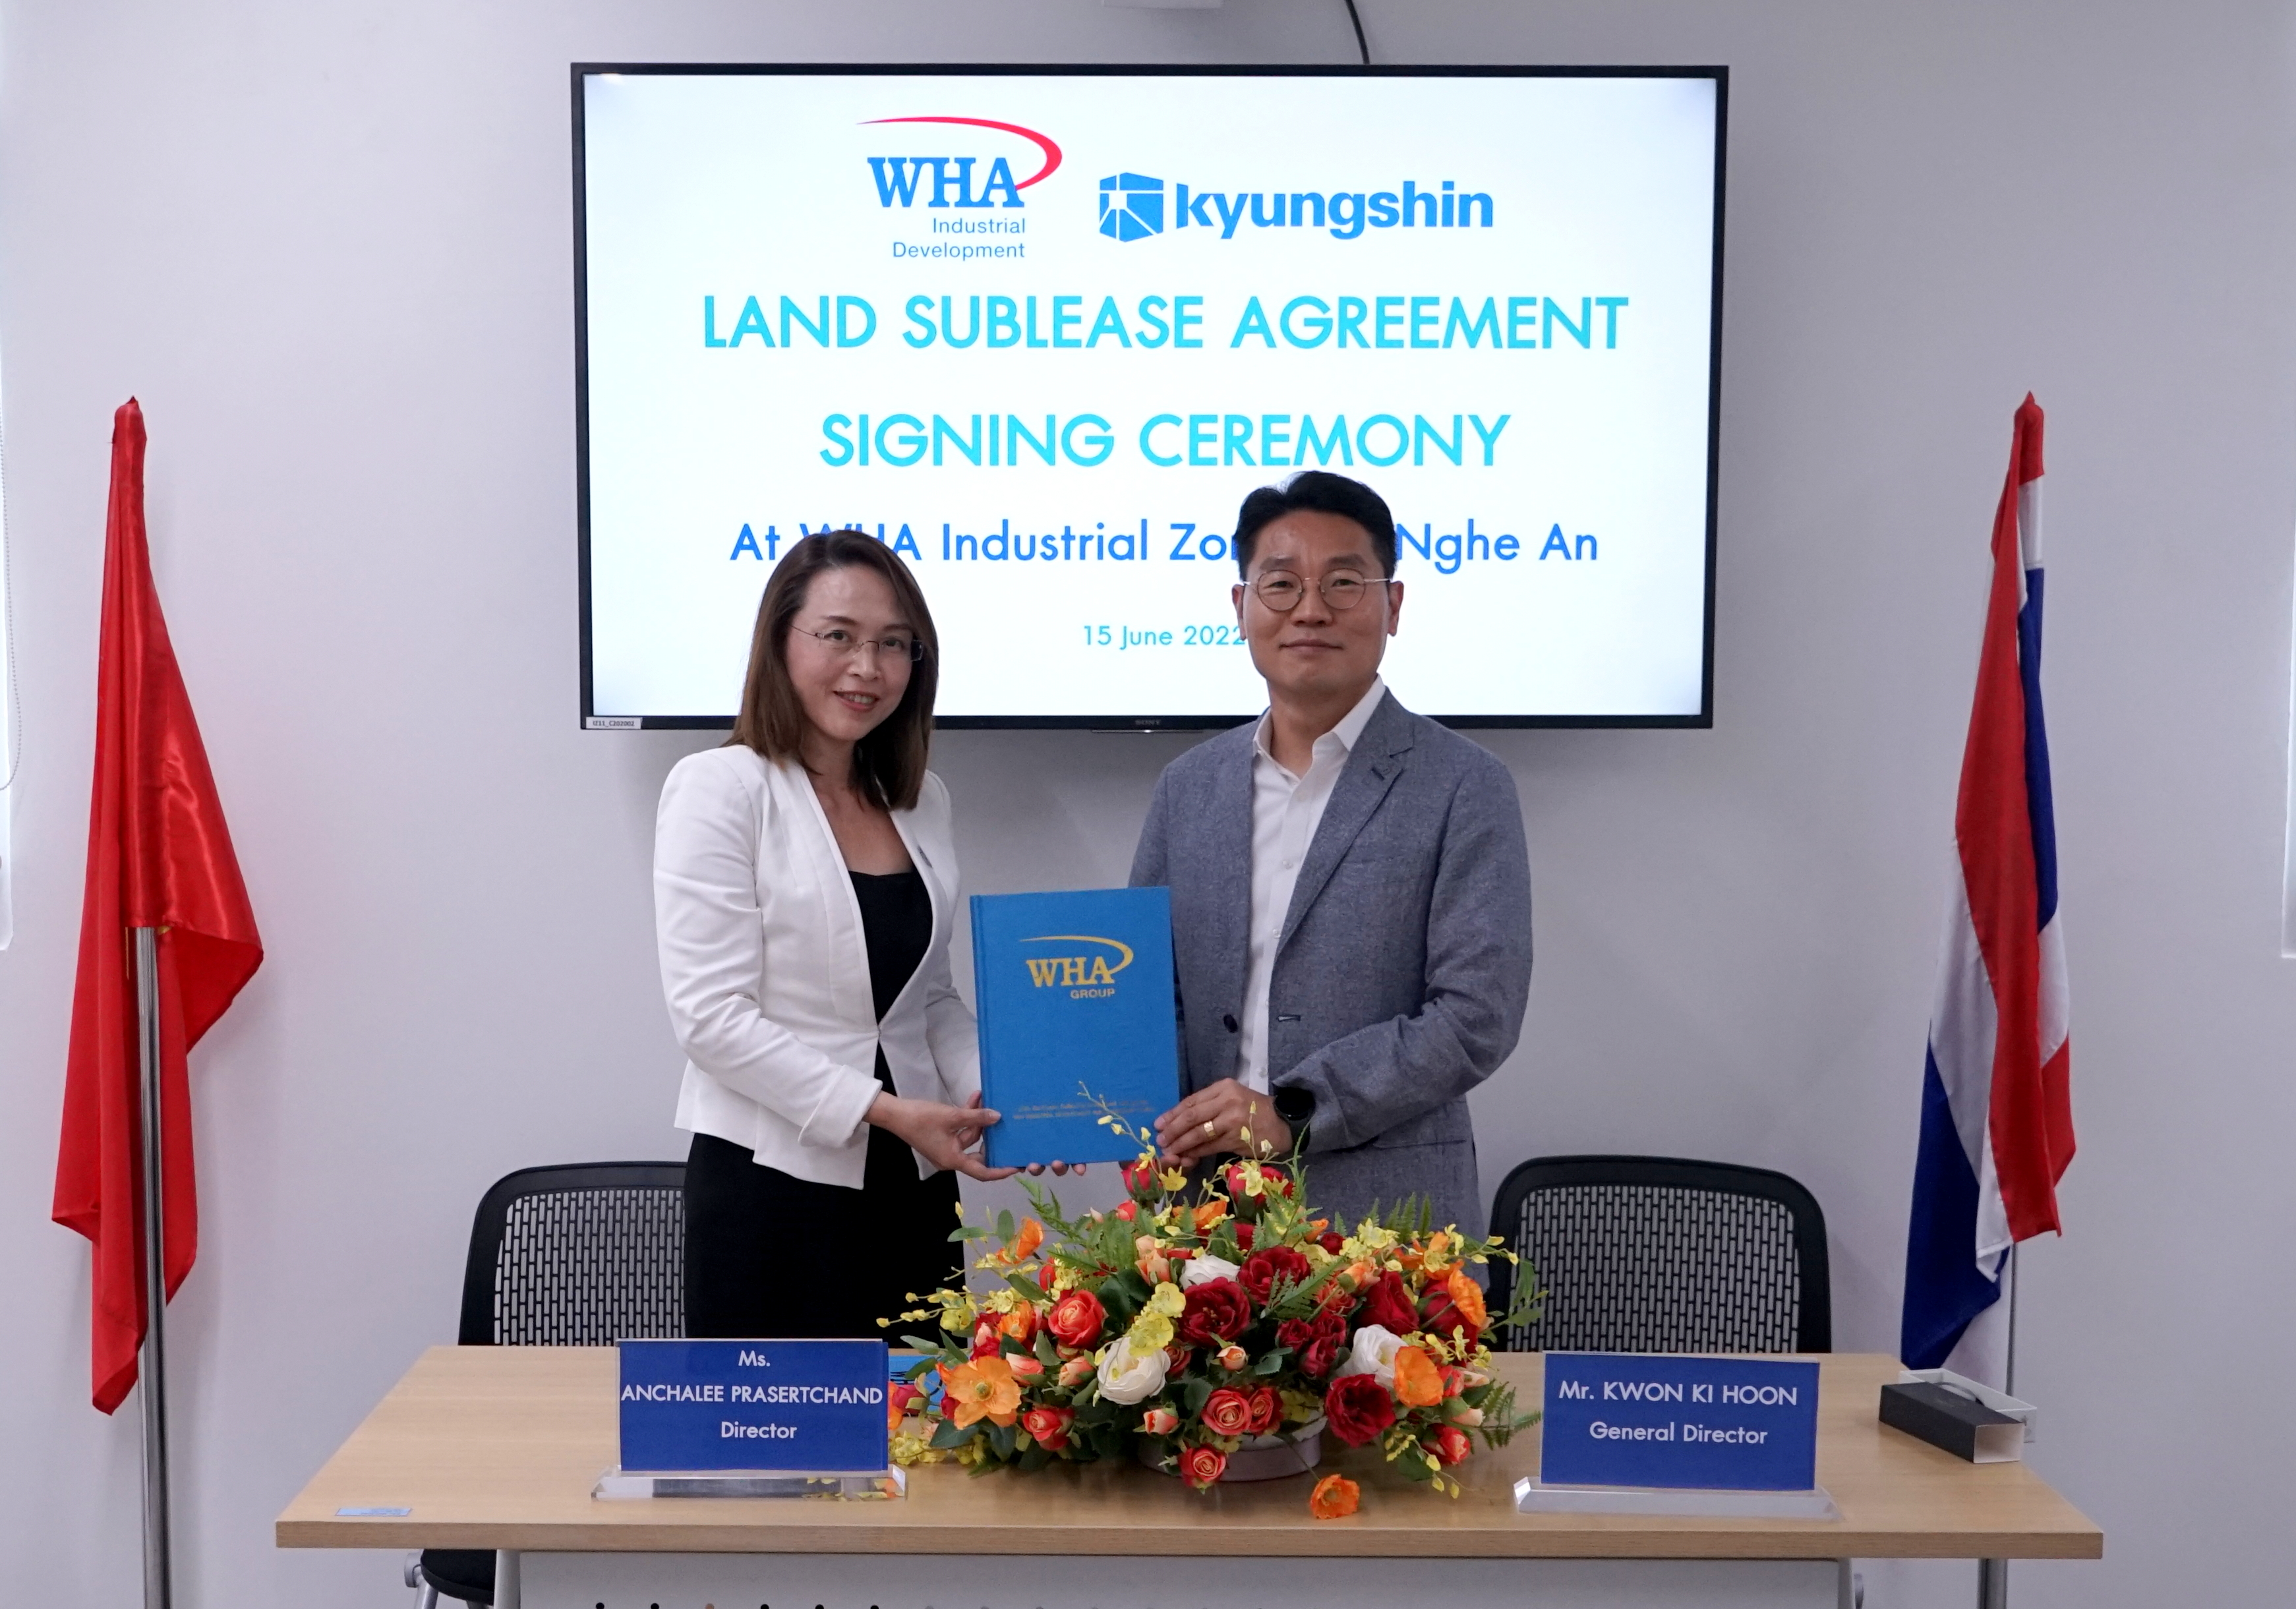 Kyungshin Nghe An Co., Ltd Signs Land Sublease Agreement for Its New Factory at WHA Industrial Zone 1 - Nghe An